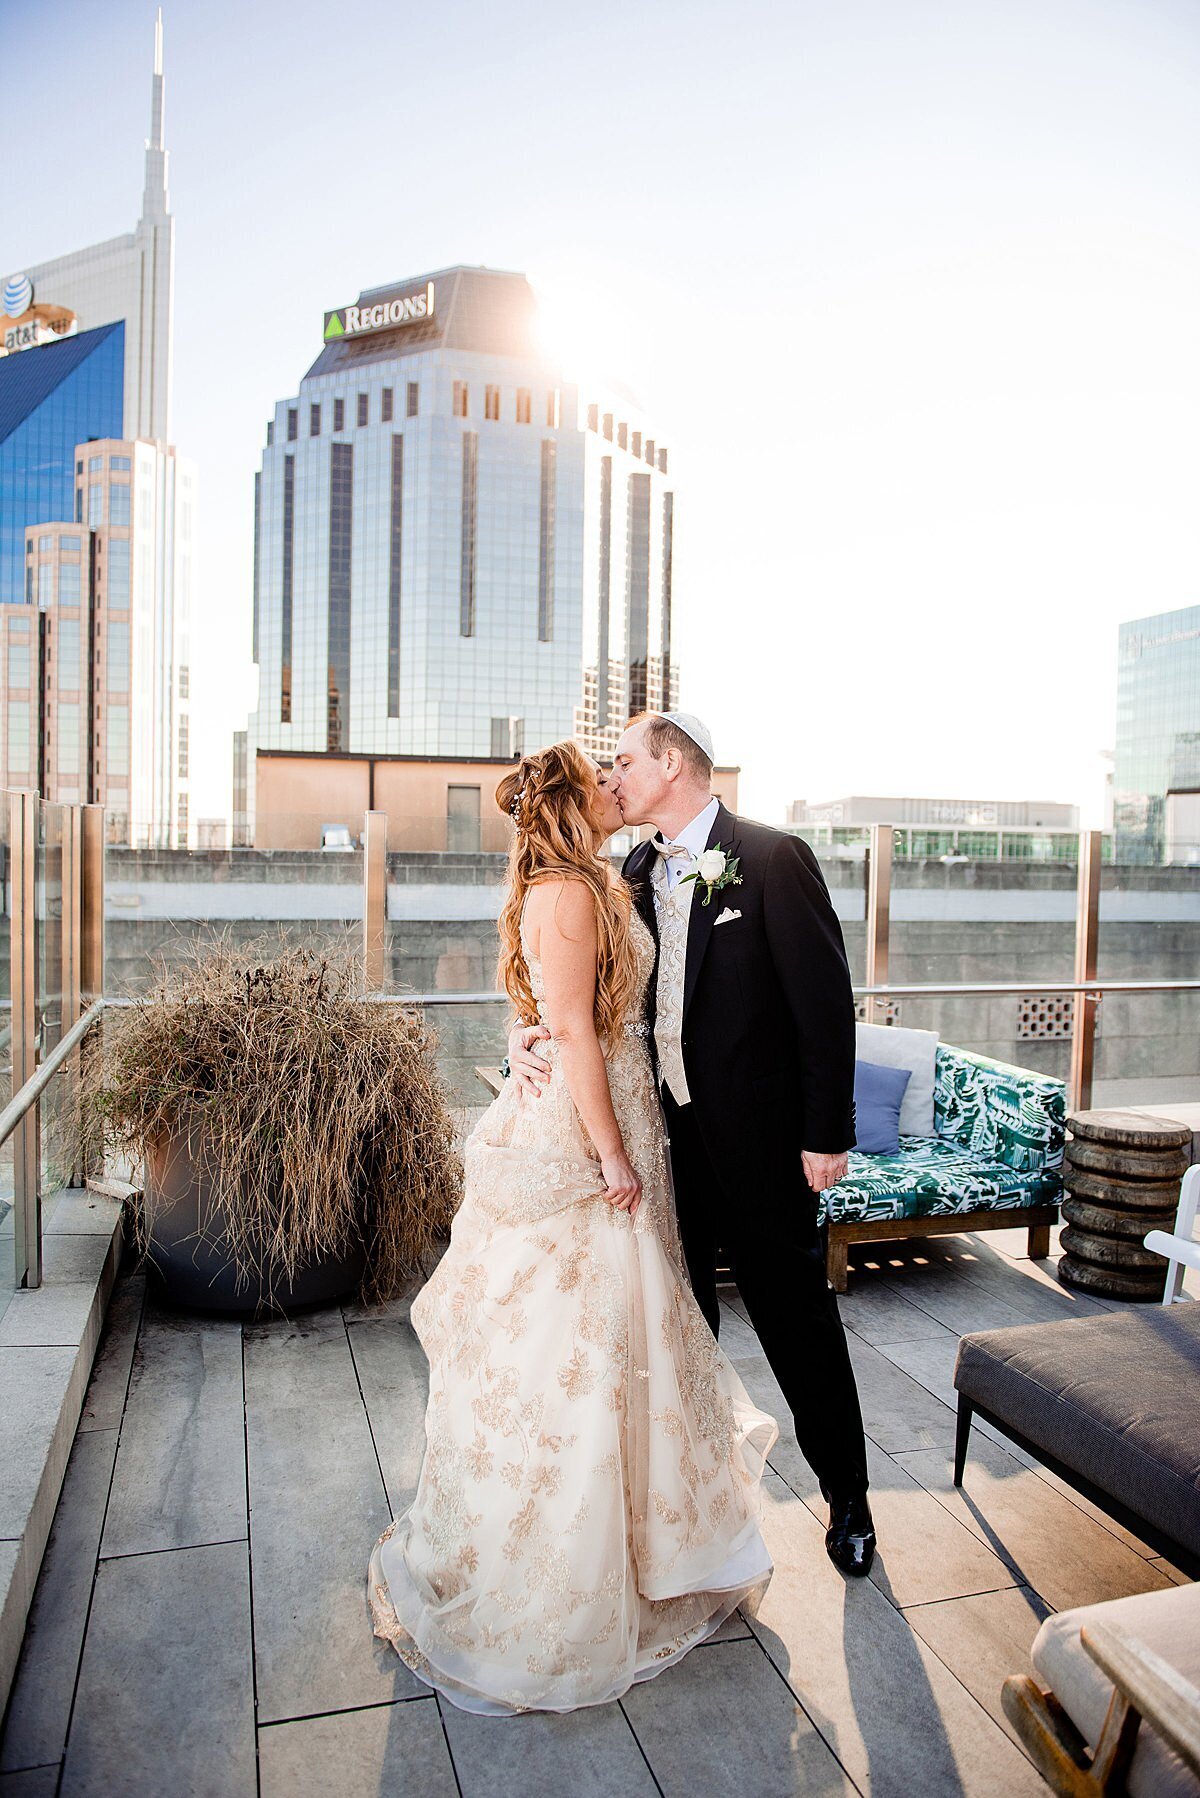 Bride and groom embracing and kissing on the rooftop bar of Noelle during golden hour, sun reflecting over the Nashville skyline